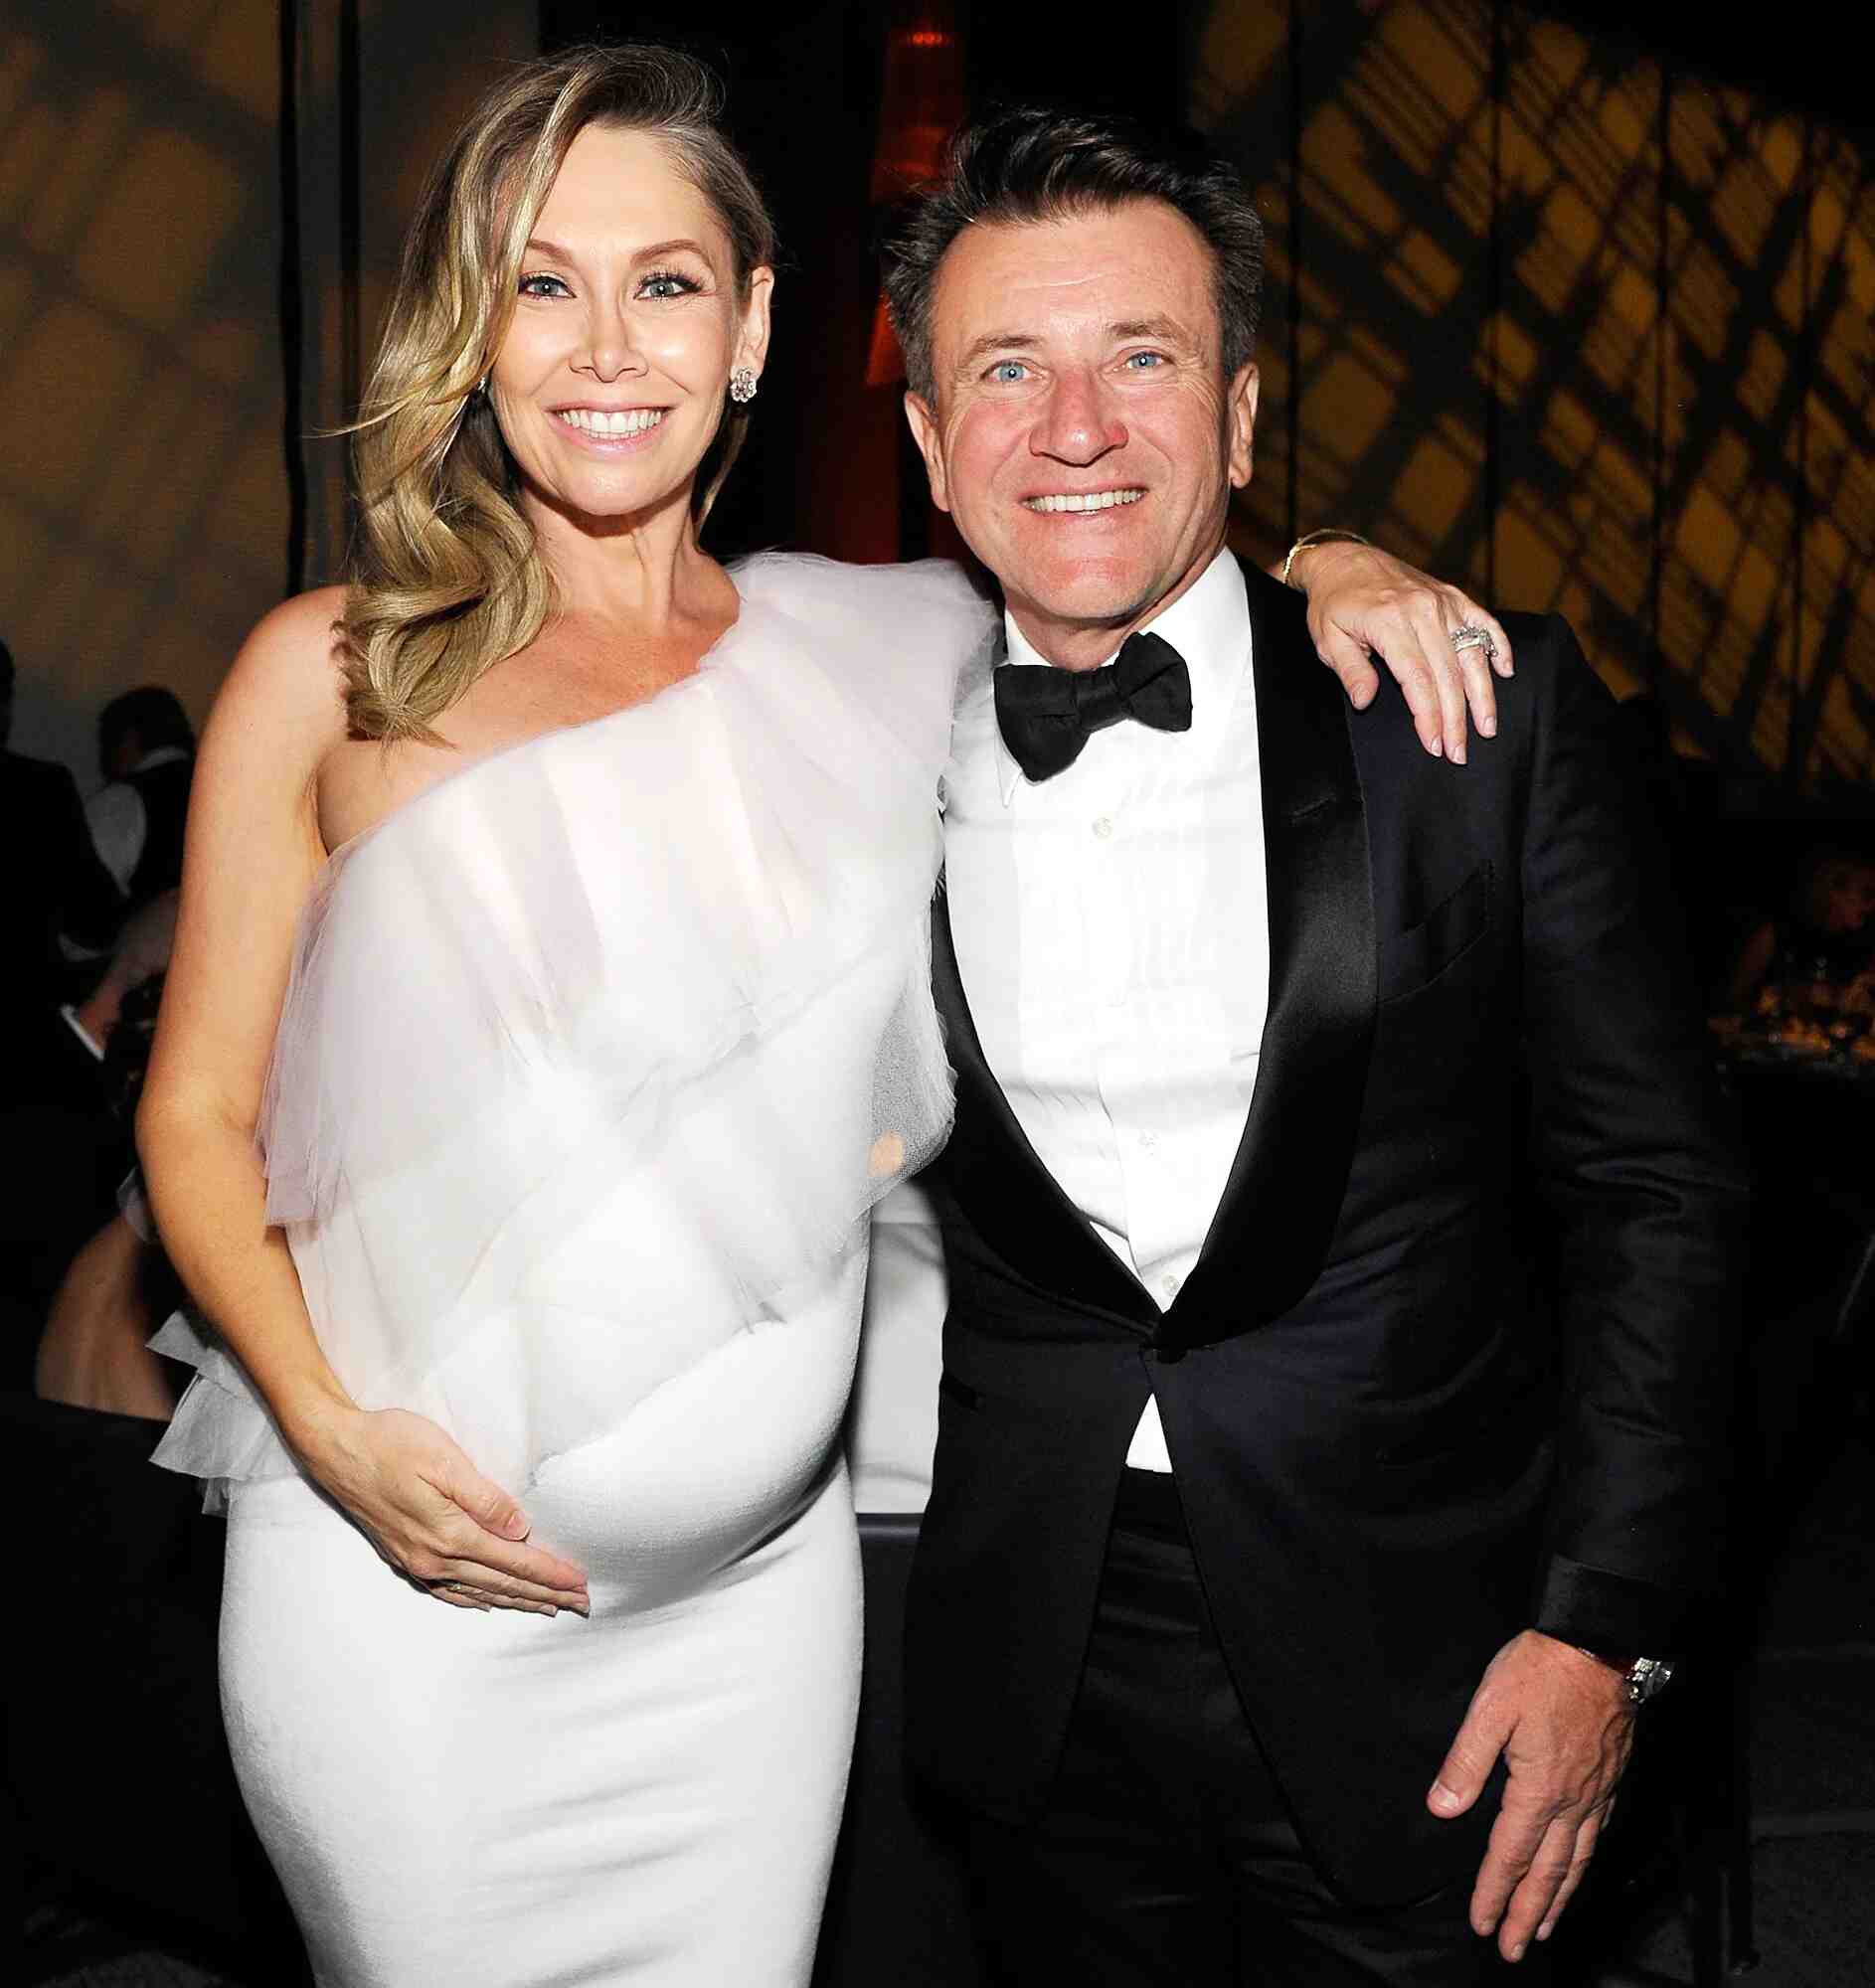 Image of Robert Herjavec with his wife Kym Johnson